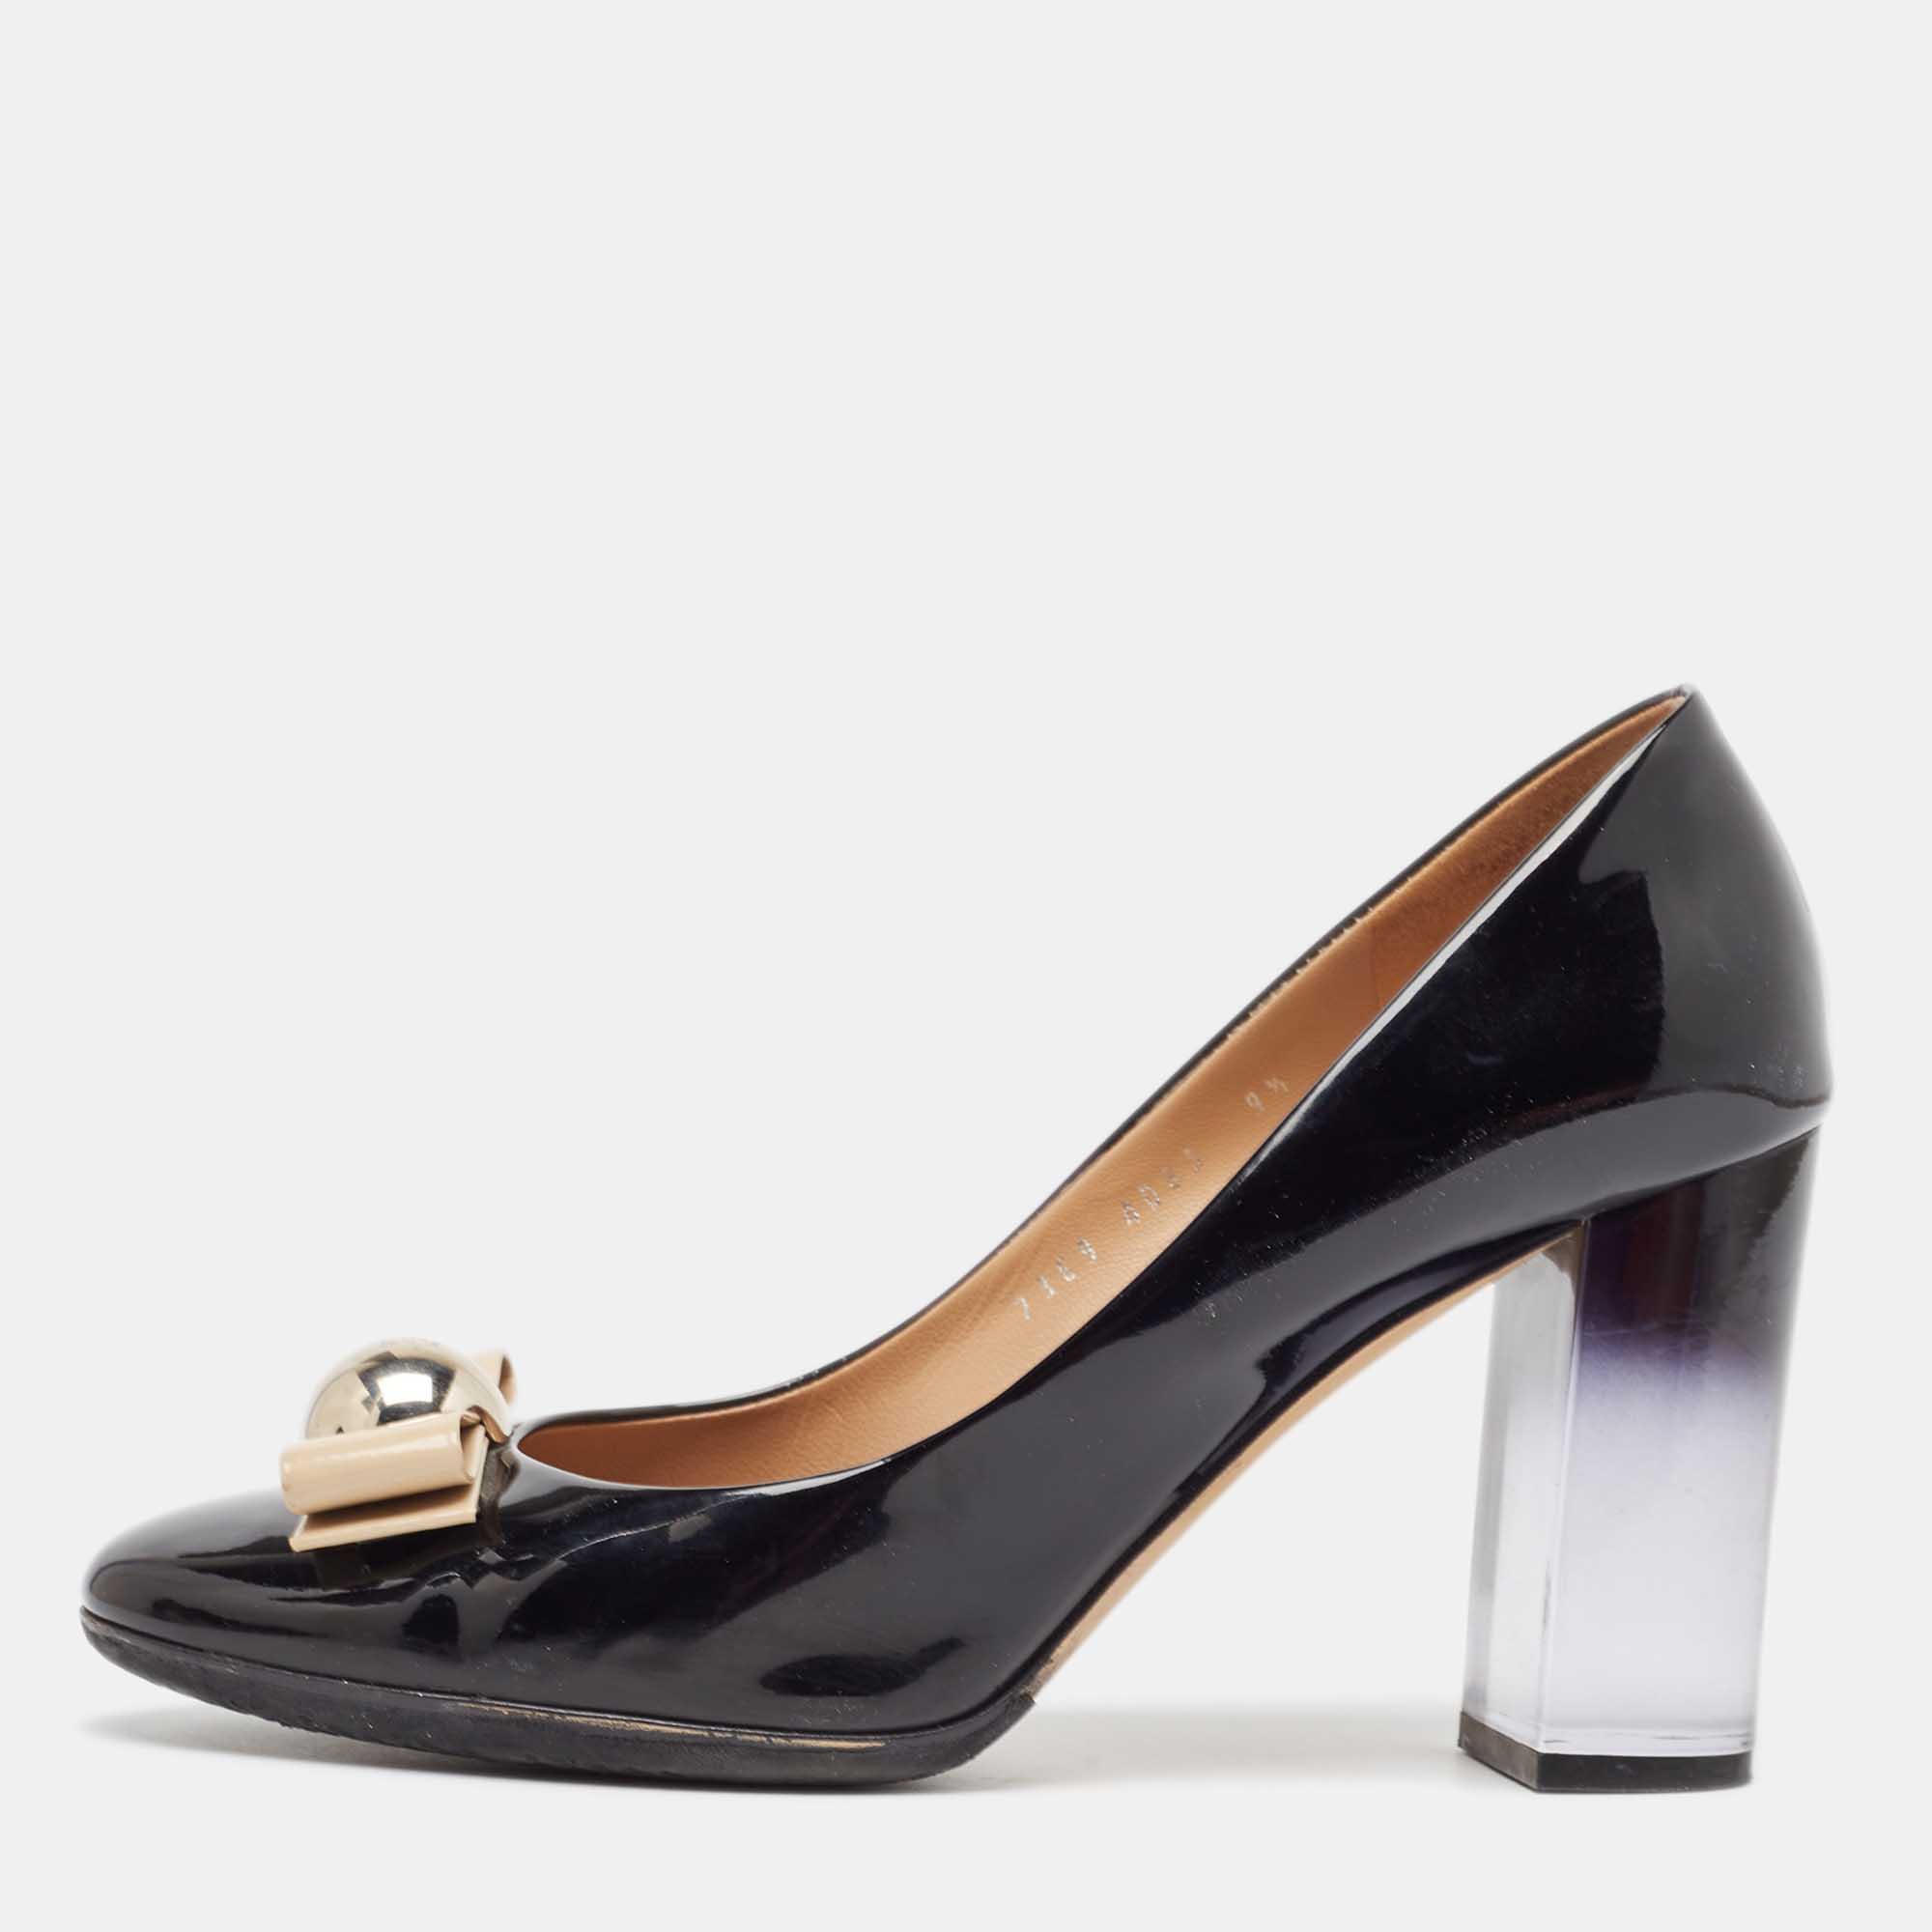 What beauty are these pumps from Salvatore Ferragamo Carrying a shiny black exterior they are crafted from leather and styled with a bow detail on the uppers. Theyll help you stand tall with the 10cm block heels made from plexiglass.